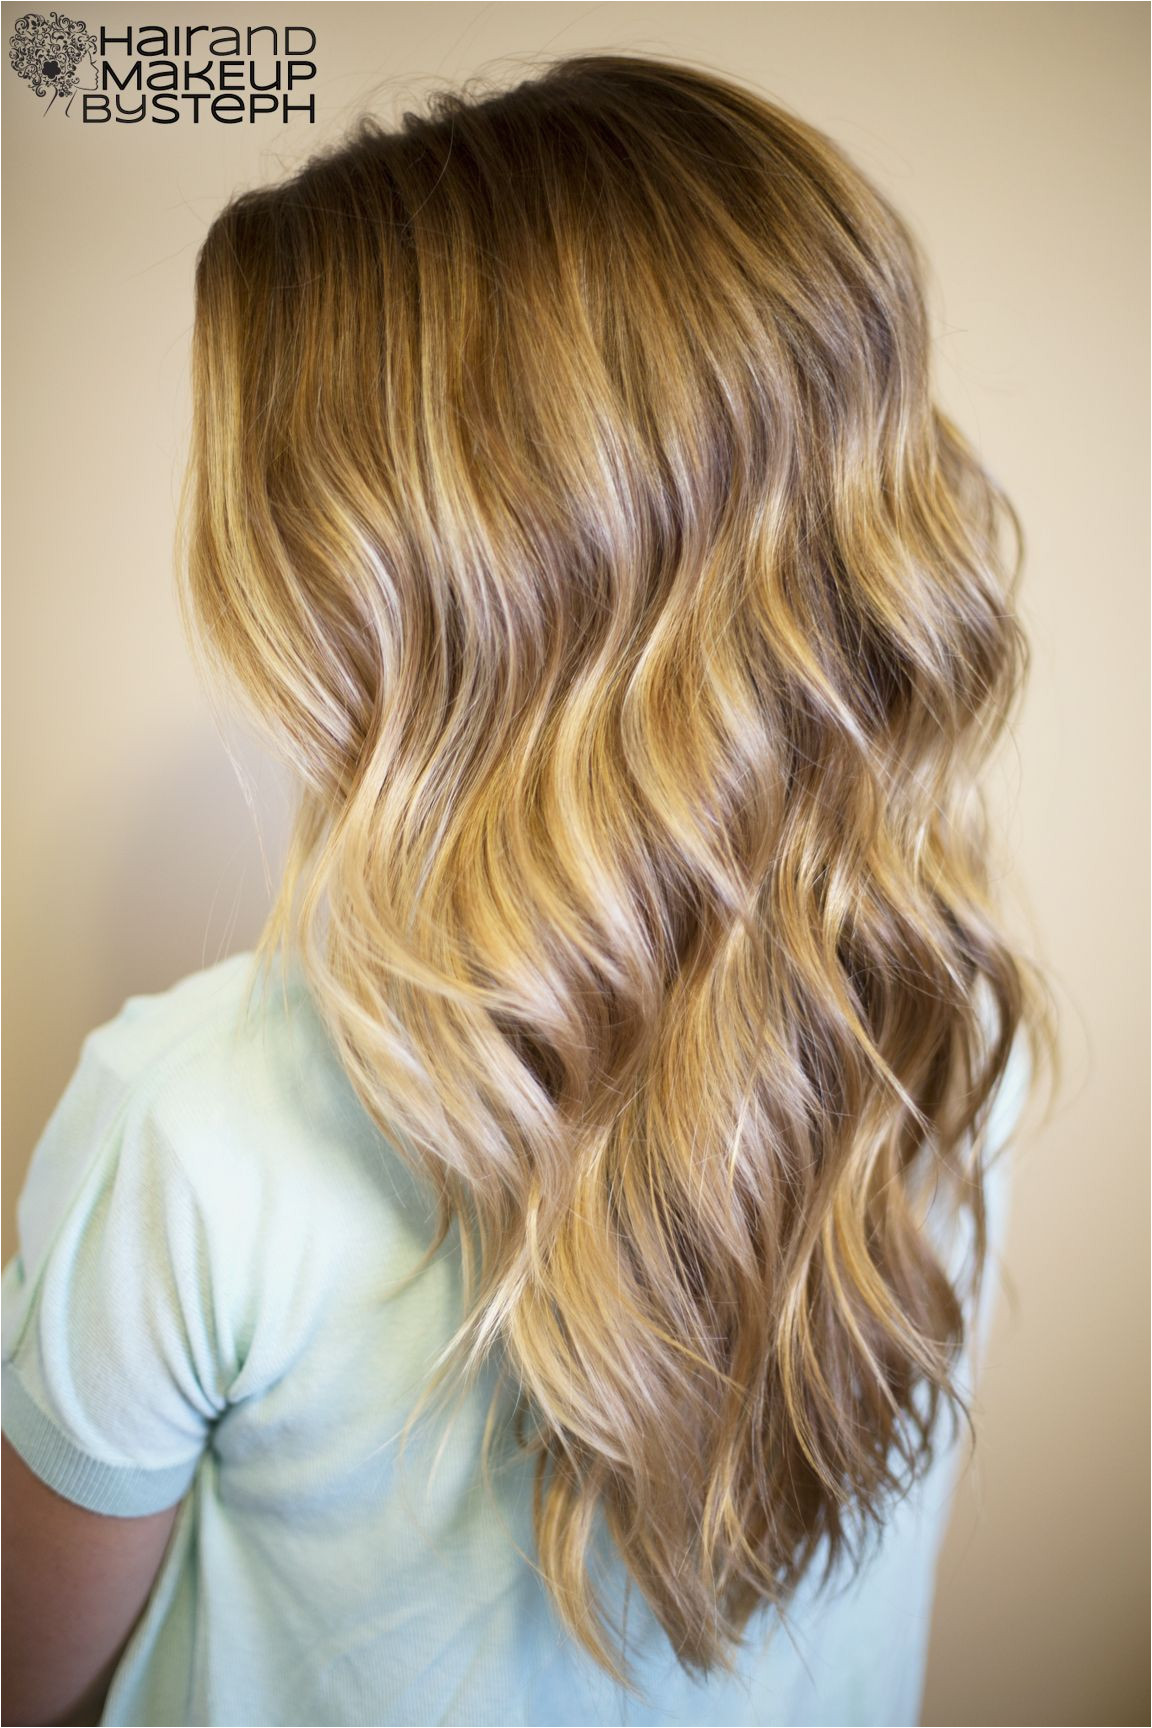 Gorgeous curls waves Tutorial Using a curling wand to simple beachy waves Everyone always asks sheryl at the front desk how she does it well